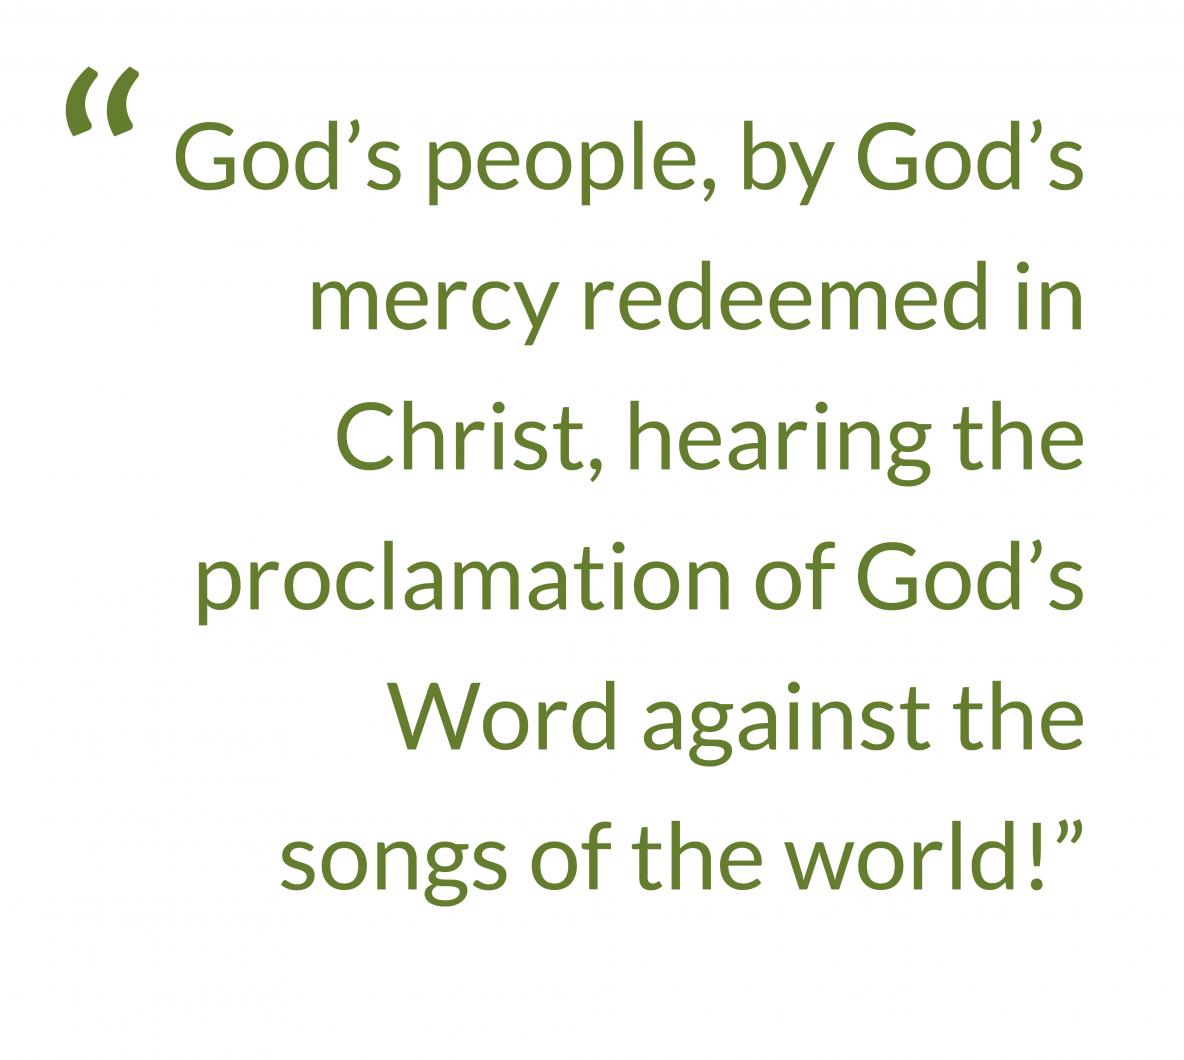 Quote from text: God’s people, by God’s mercy redeemed in Christ, hearing the proclamation of God’s Word against the songs of the world!